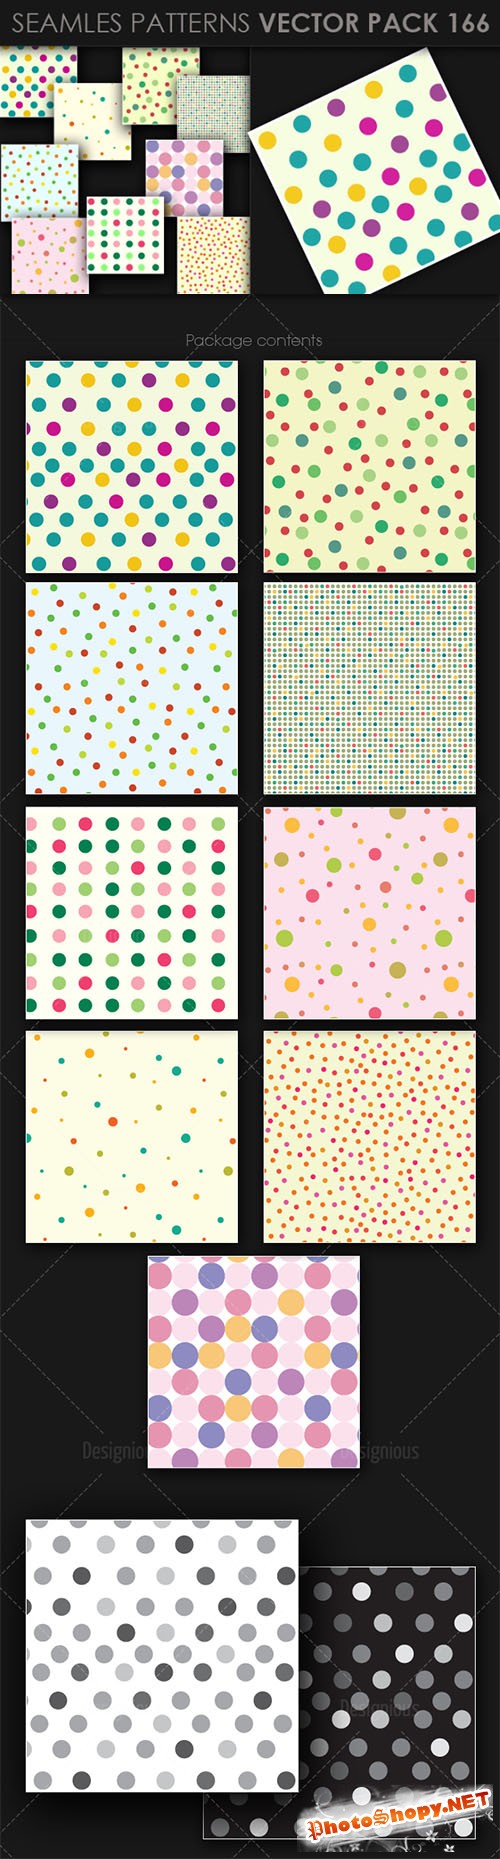 9 Seamless Patterns Vector Pack 166